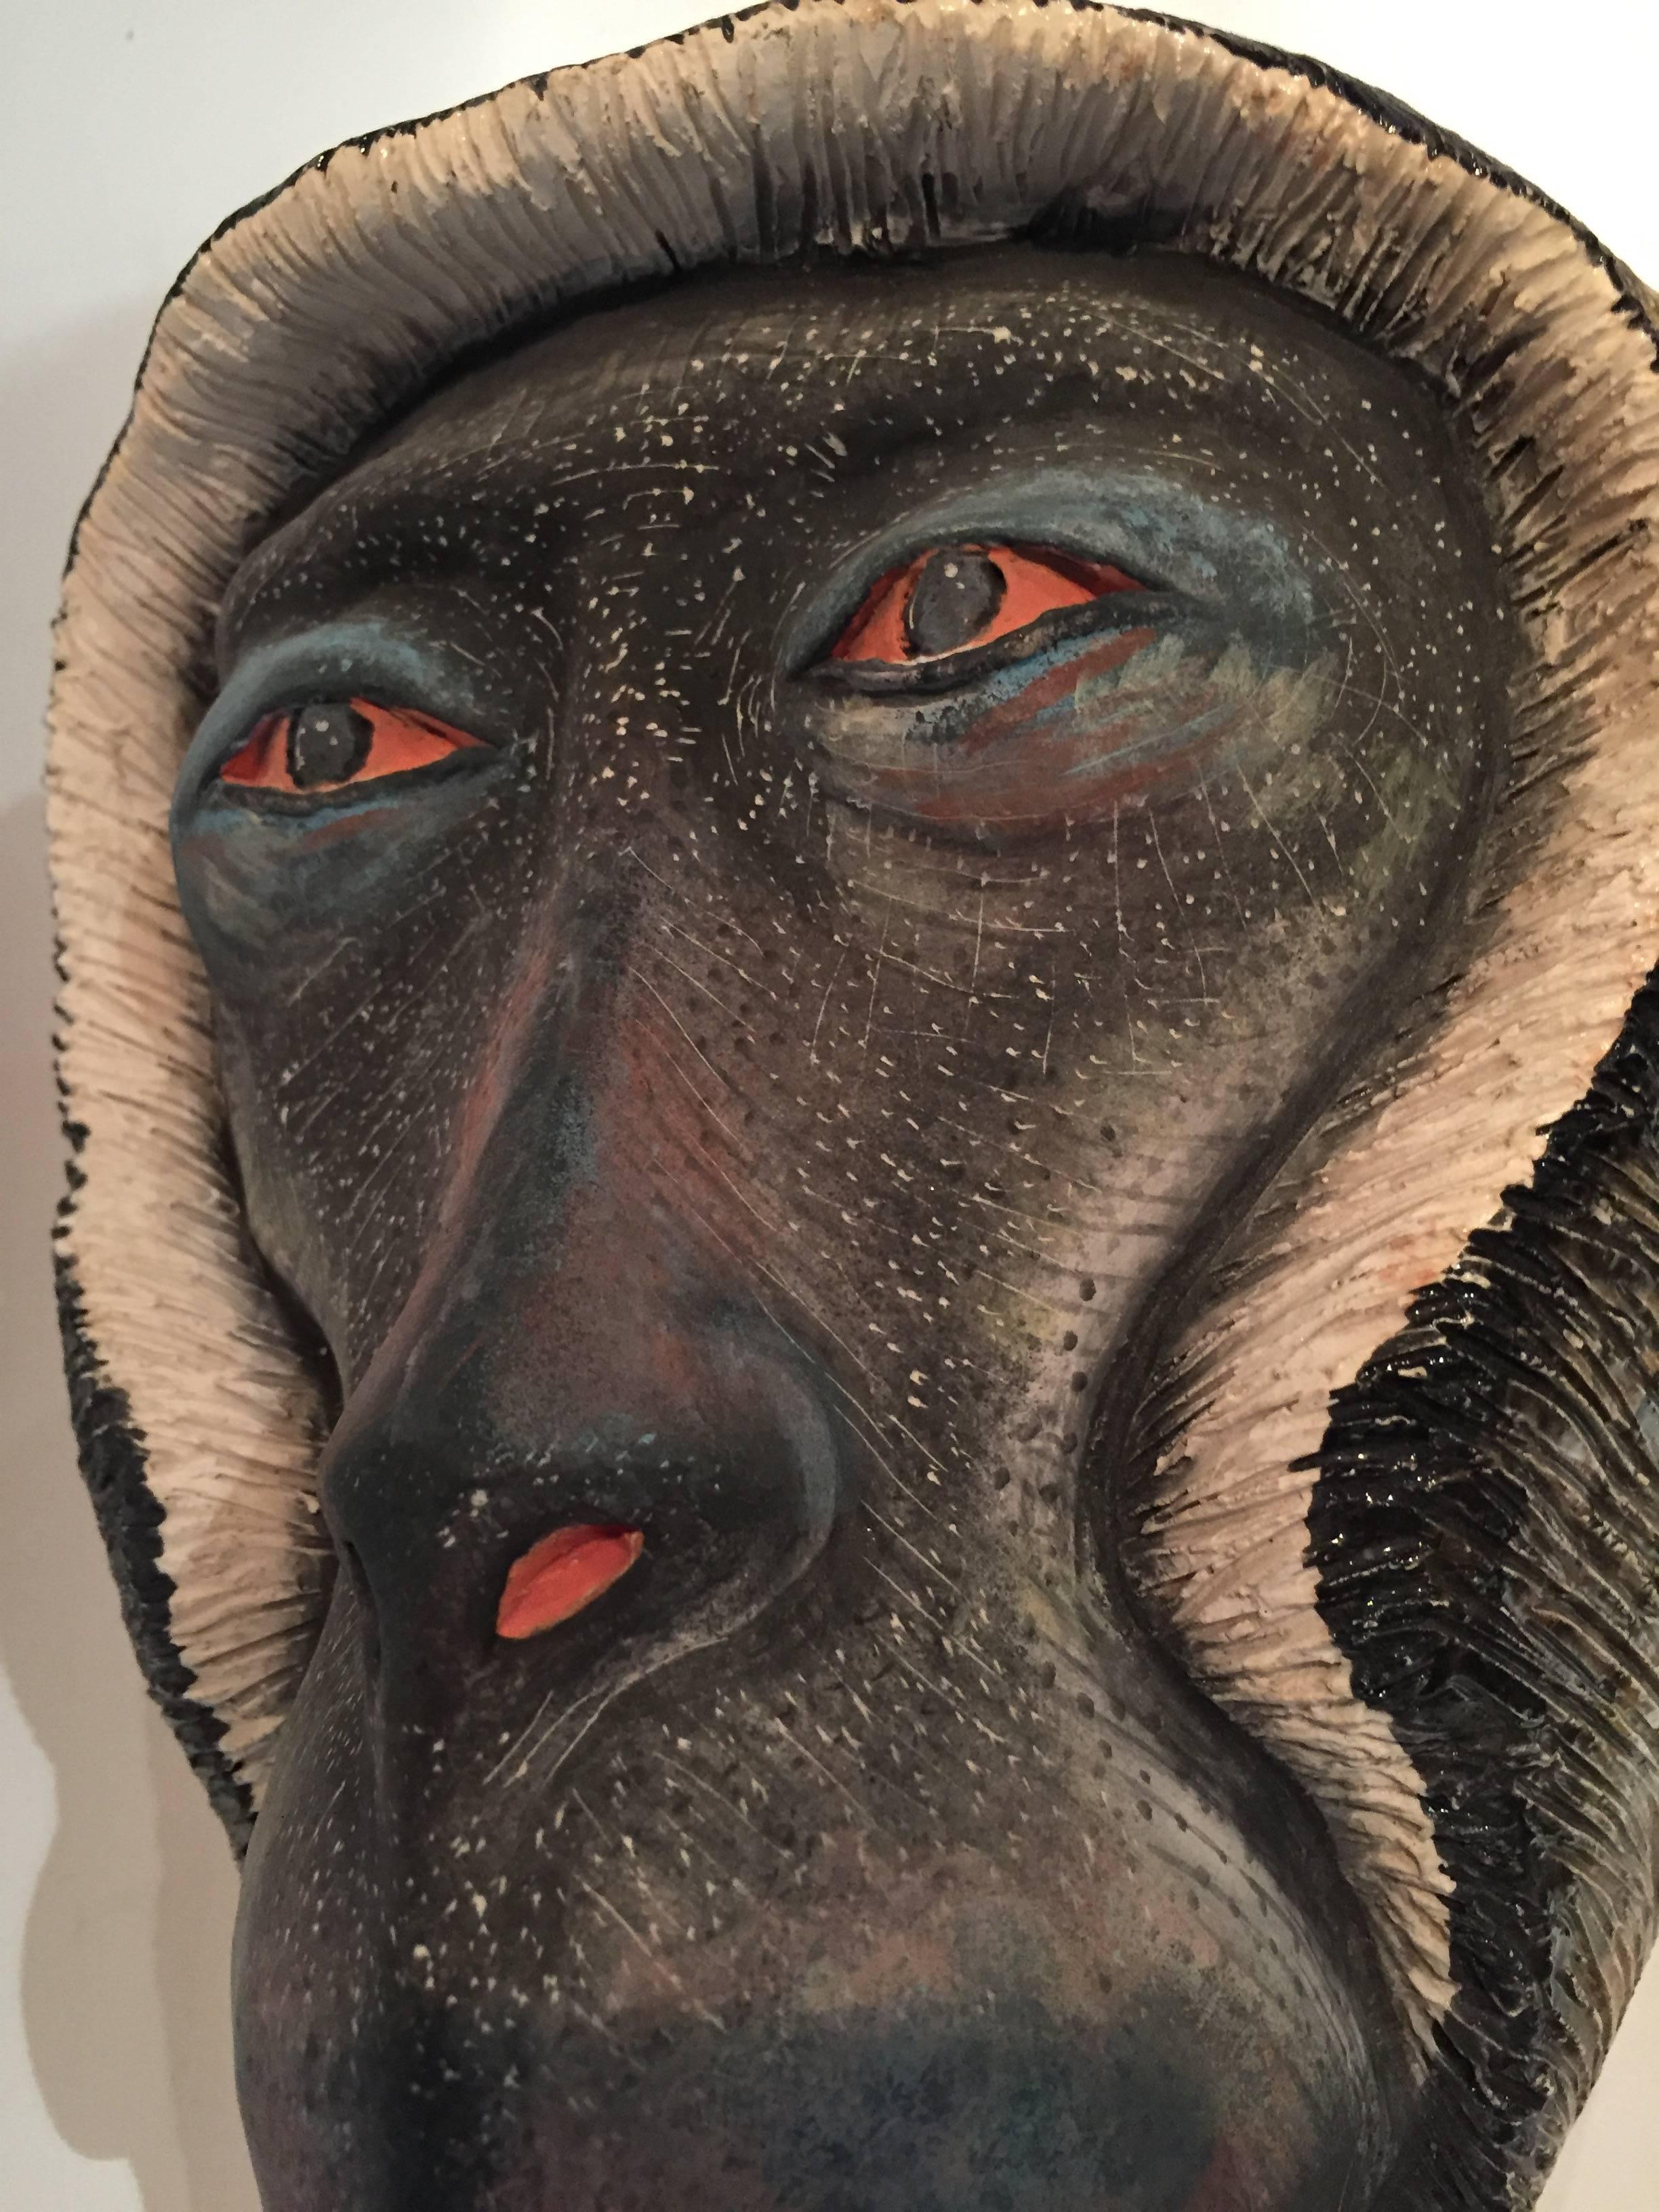 Monkey Mask, ceramic sculpture by Ardmore from South Africa. Sculpted and painted by Engelbert Nyoni. 

Ardmore ceramic art was established by Fée Halsted and is situated in the foothills of the Drakensberg Mountains of KwaZulu-Natal where artists